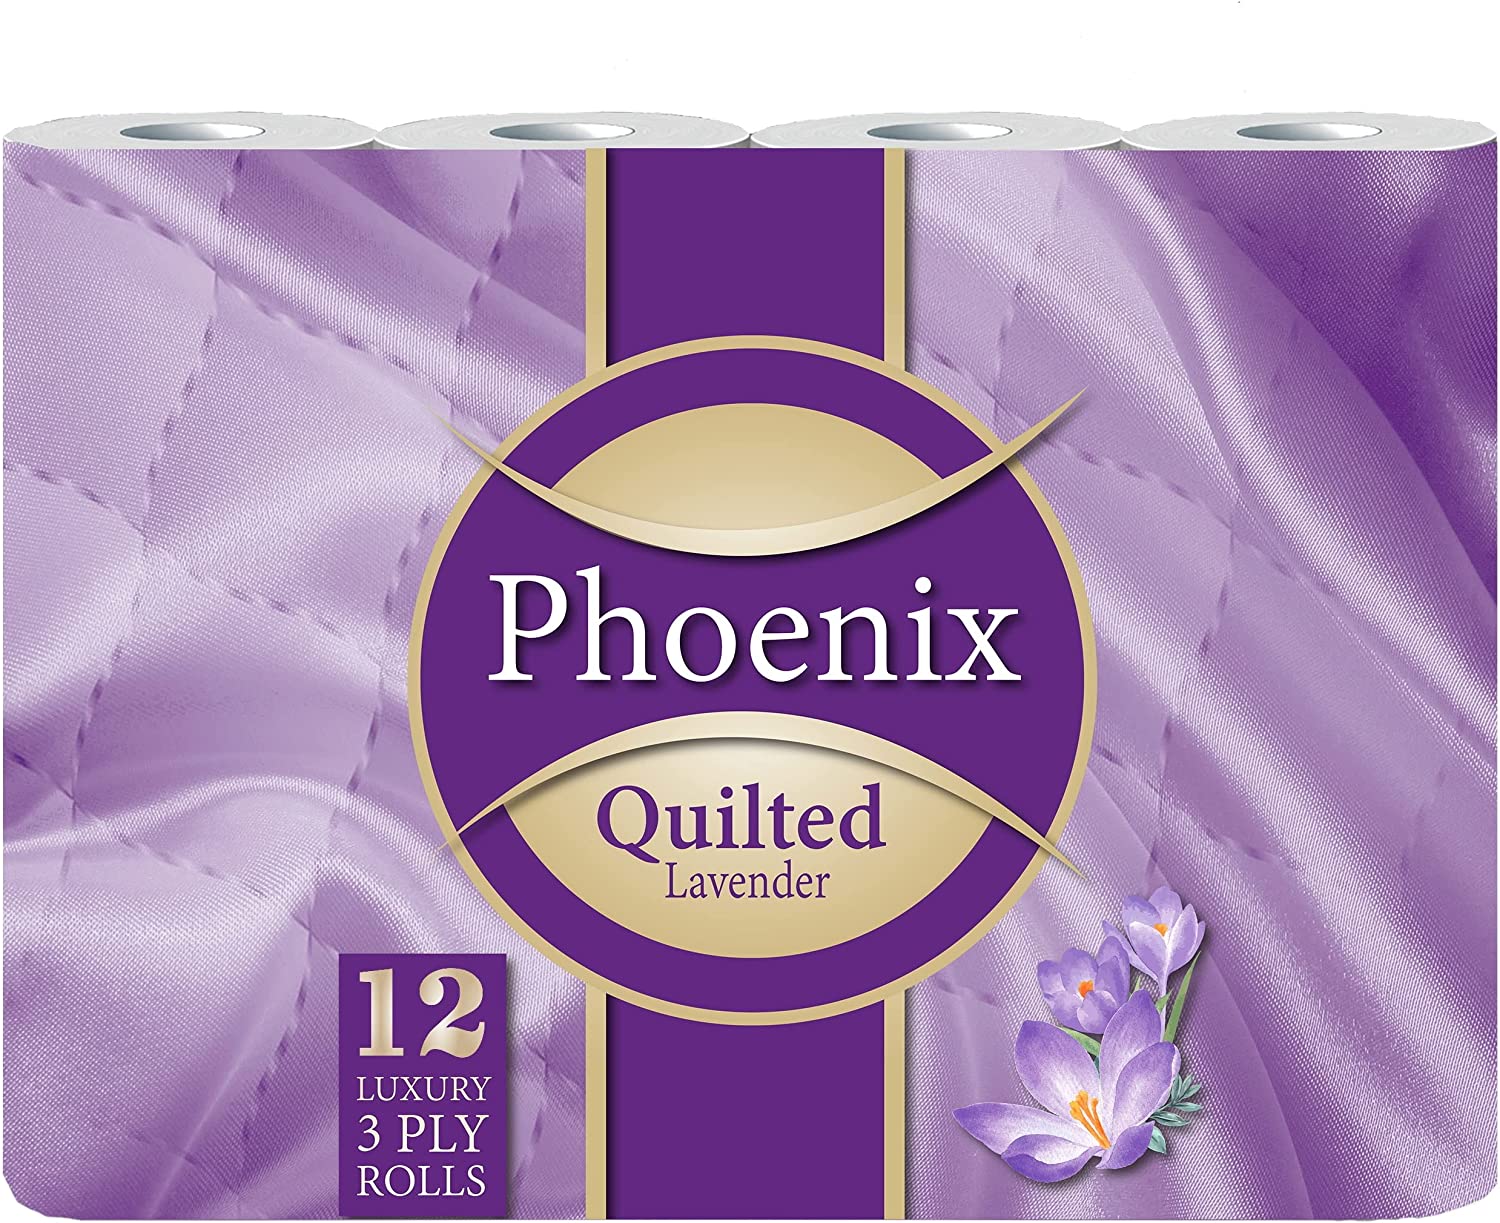 Phoenix Lavender Fragrance Luxury 3 Ply Toilet Rolls 12 Pack RRP £6.99 CLEARANCE XL £4.99